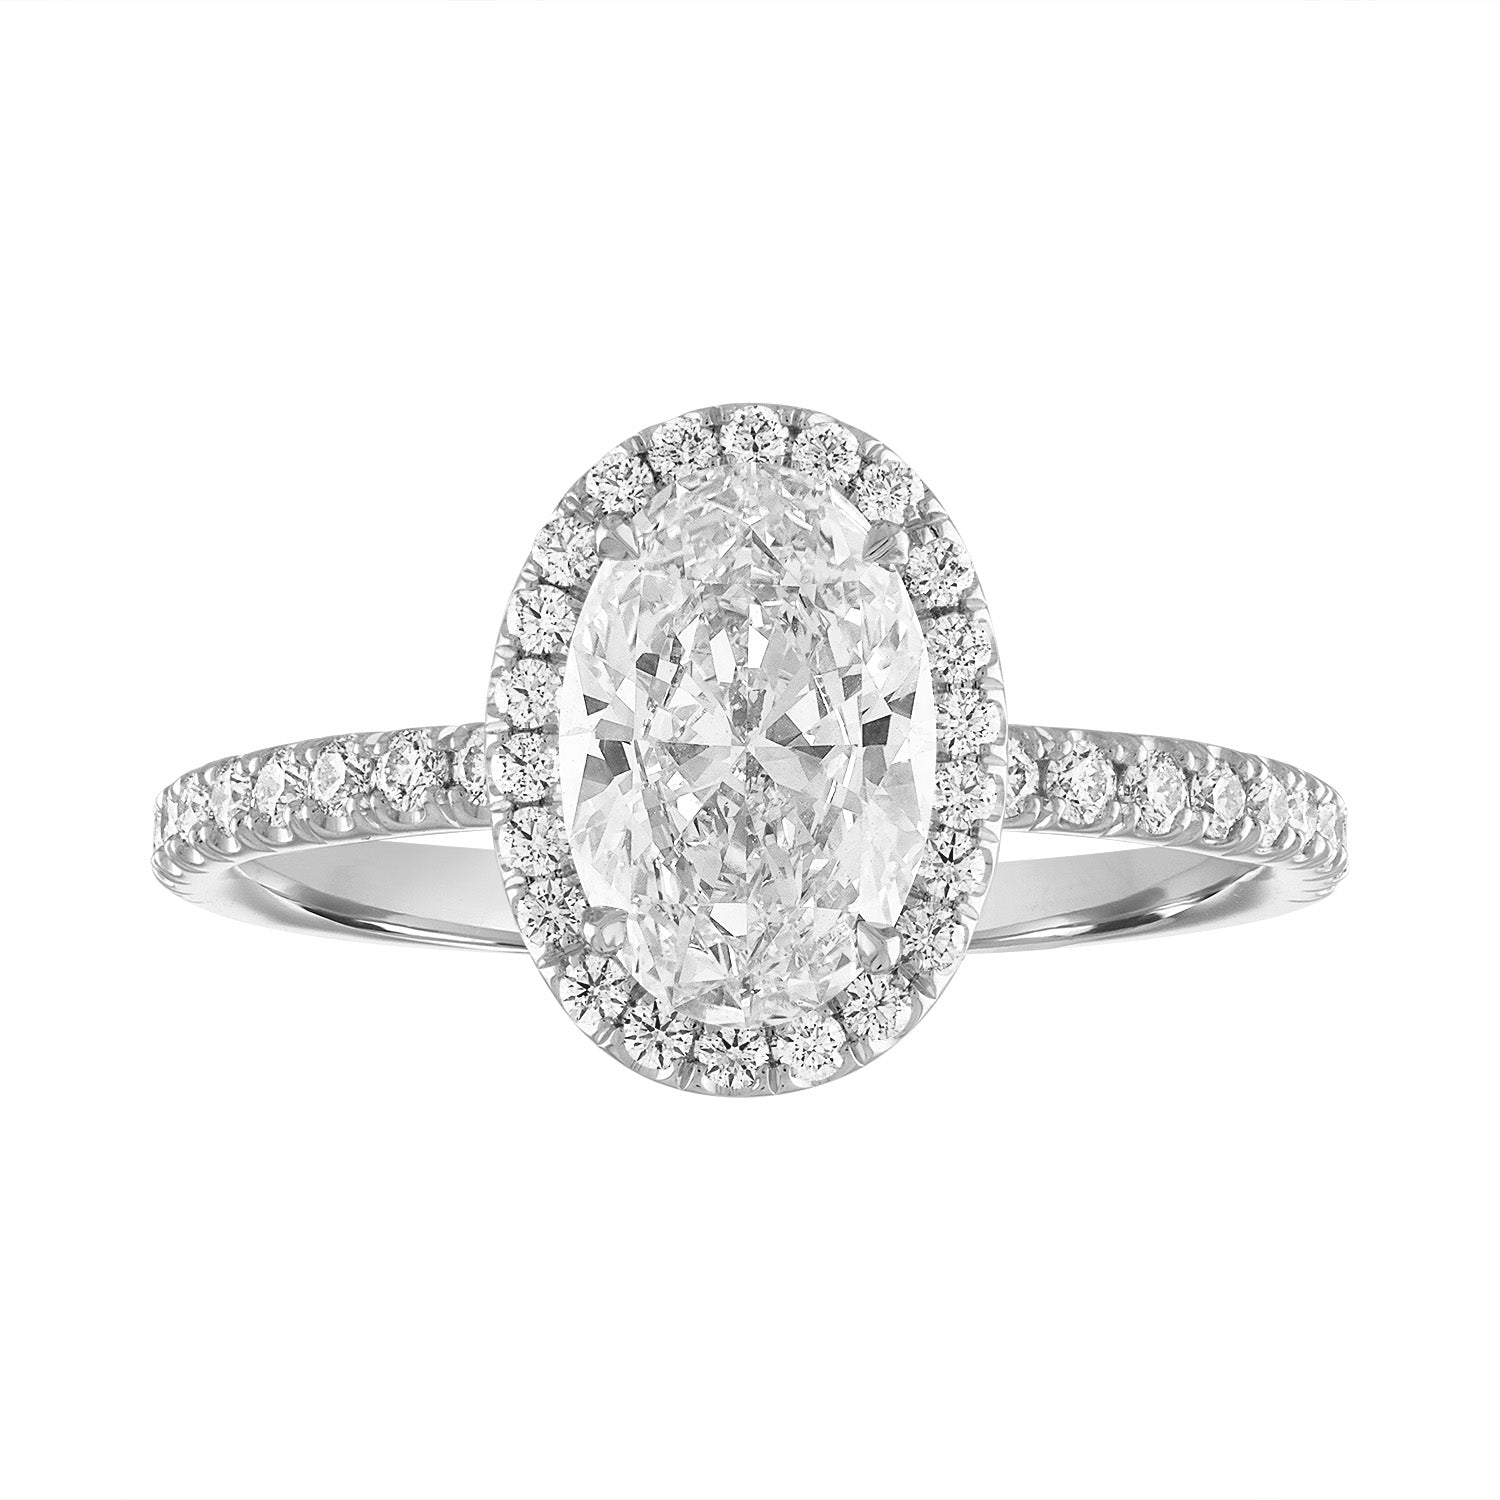 Oval Halo Engagement Ring in Platinum